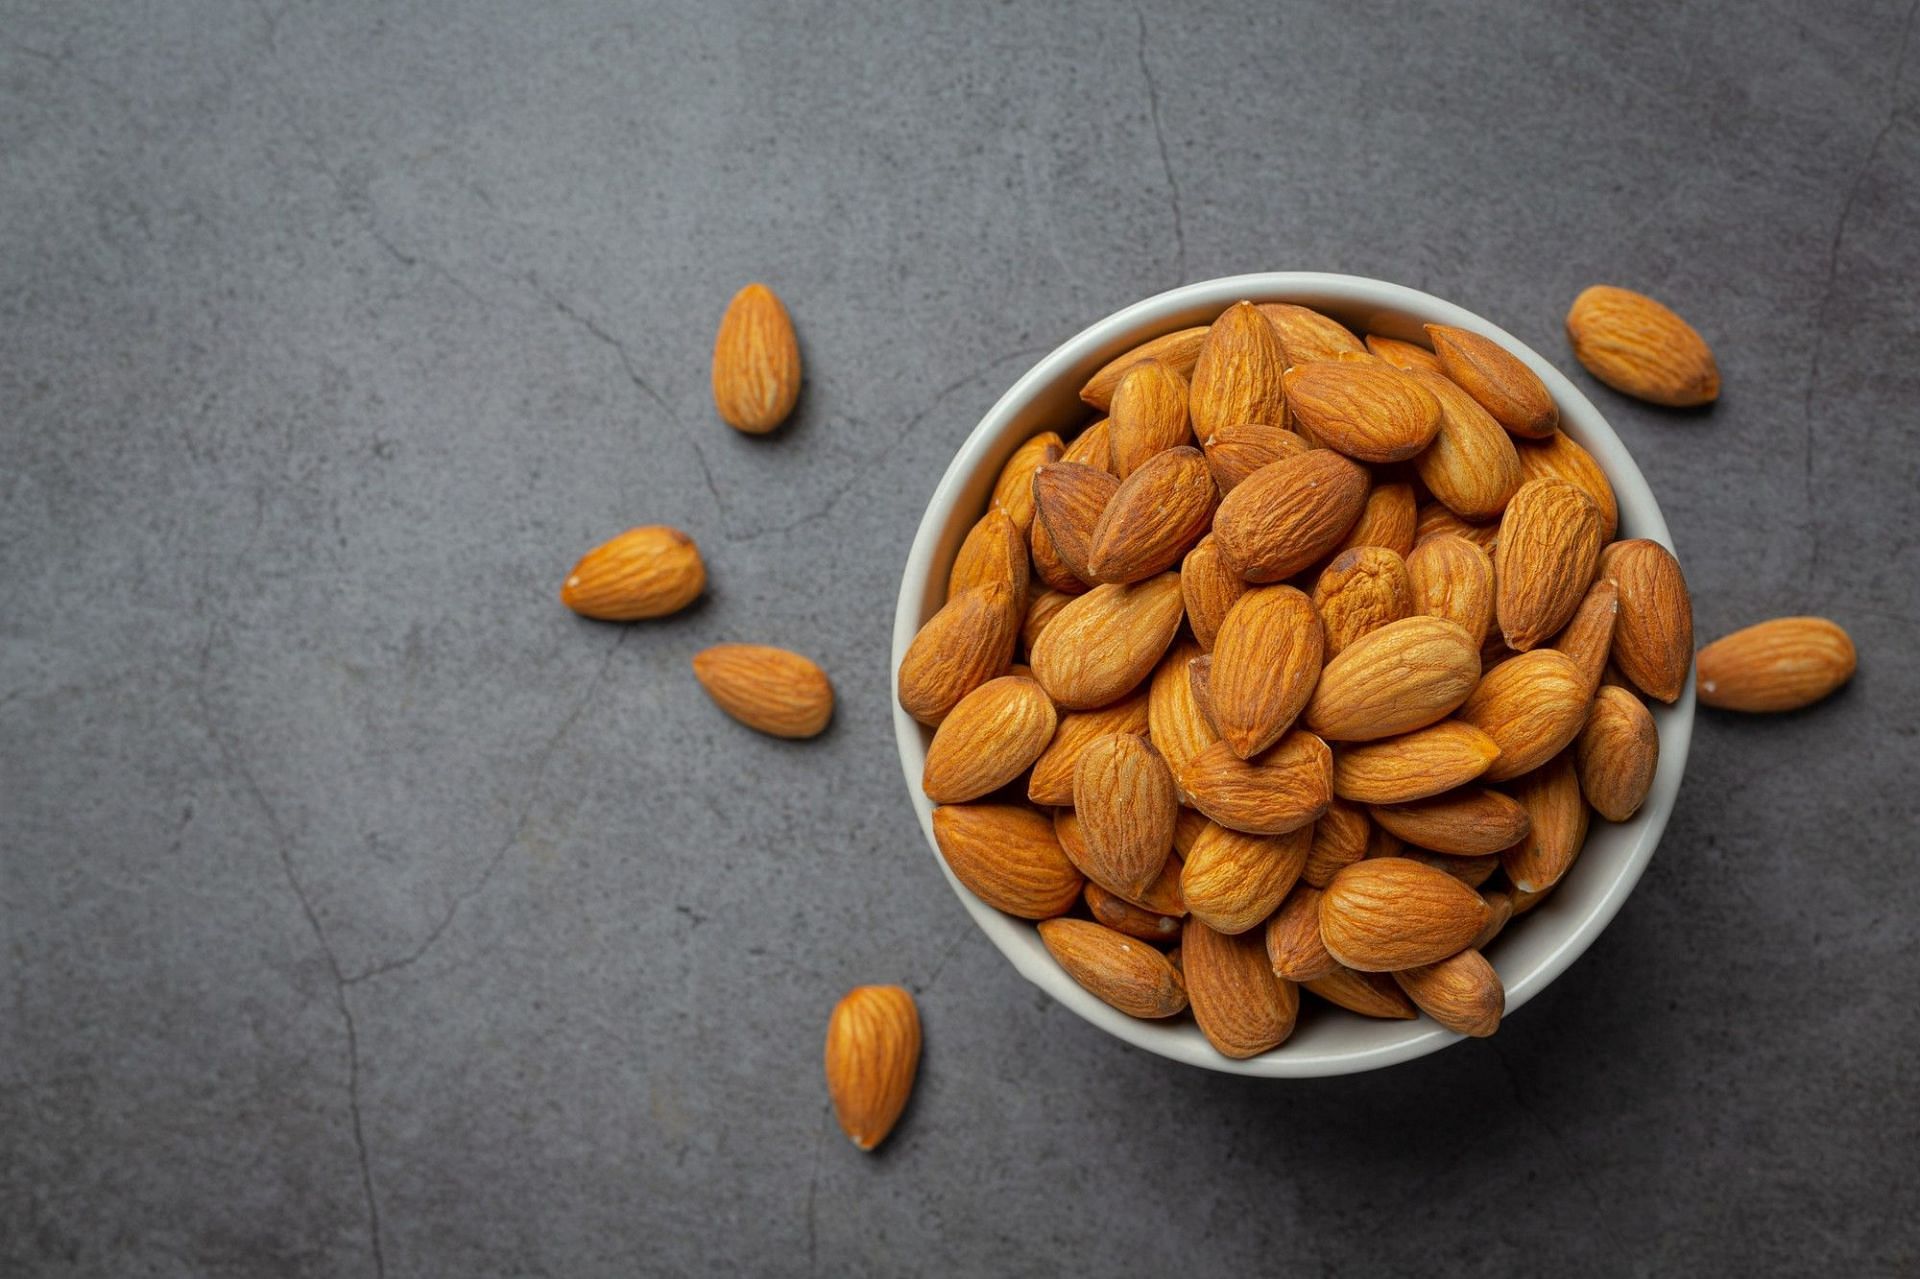 Almond as a food for breakfast (Image by jcomp on Freepik)